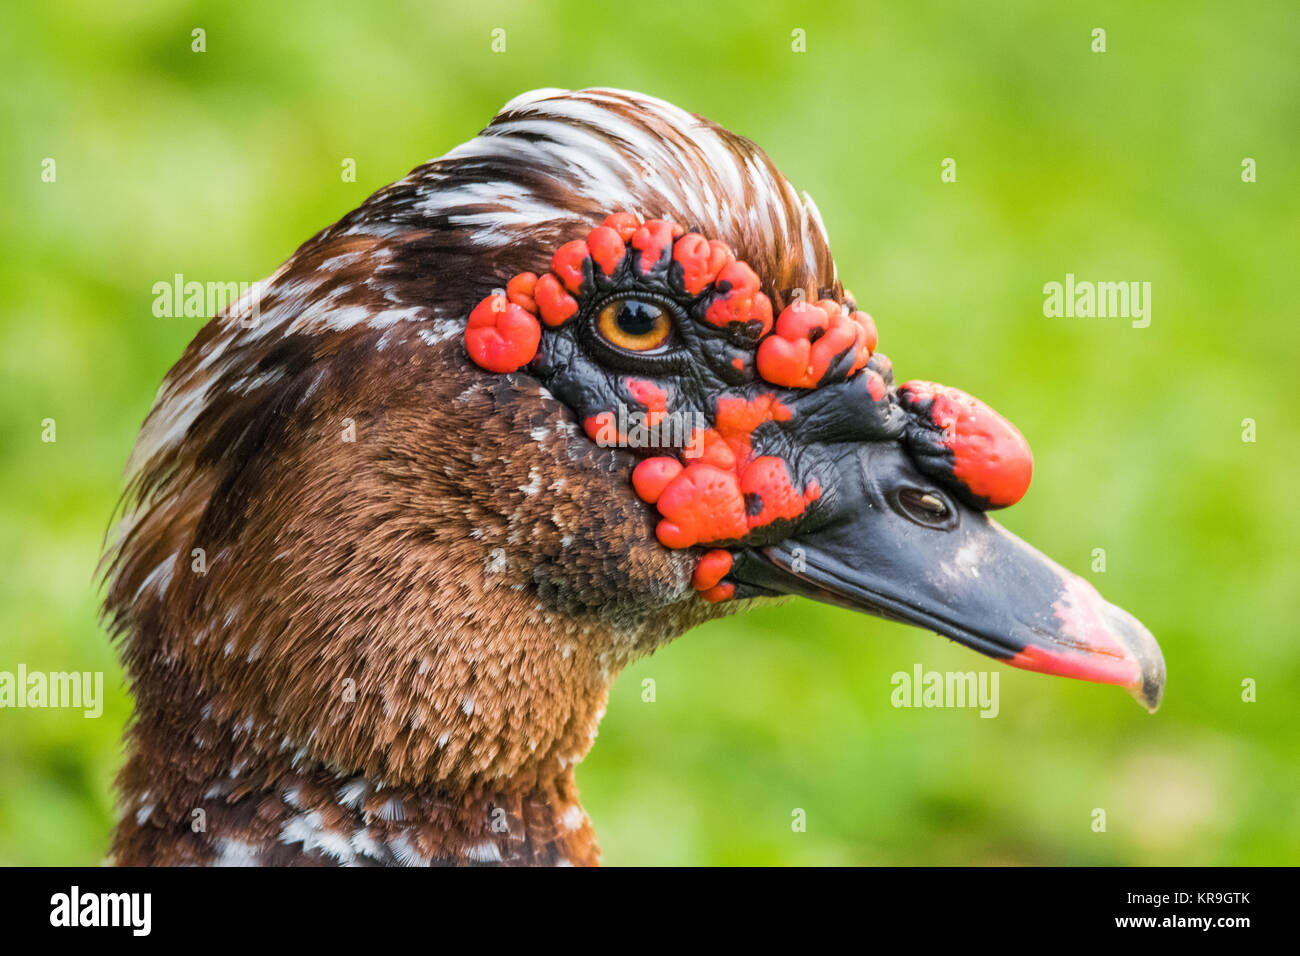 Angry duck Stock Photo